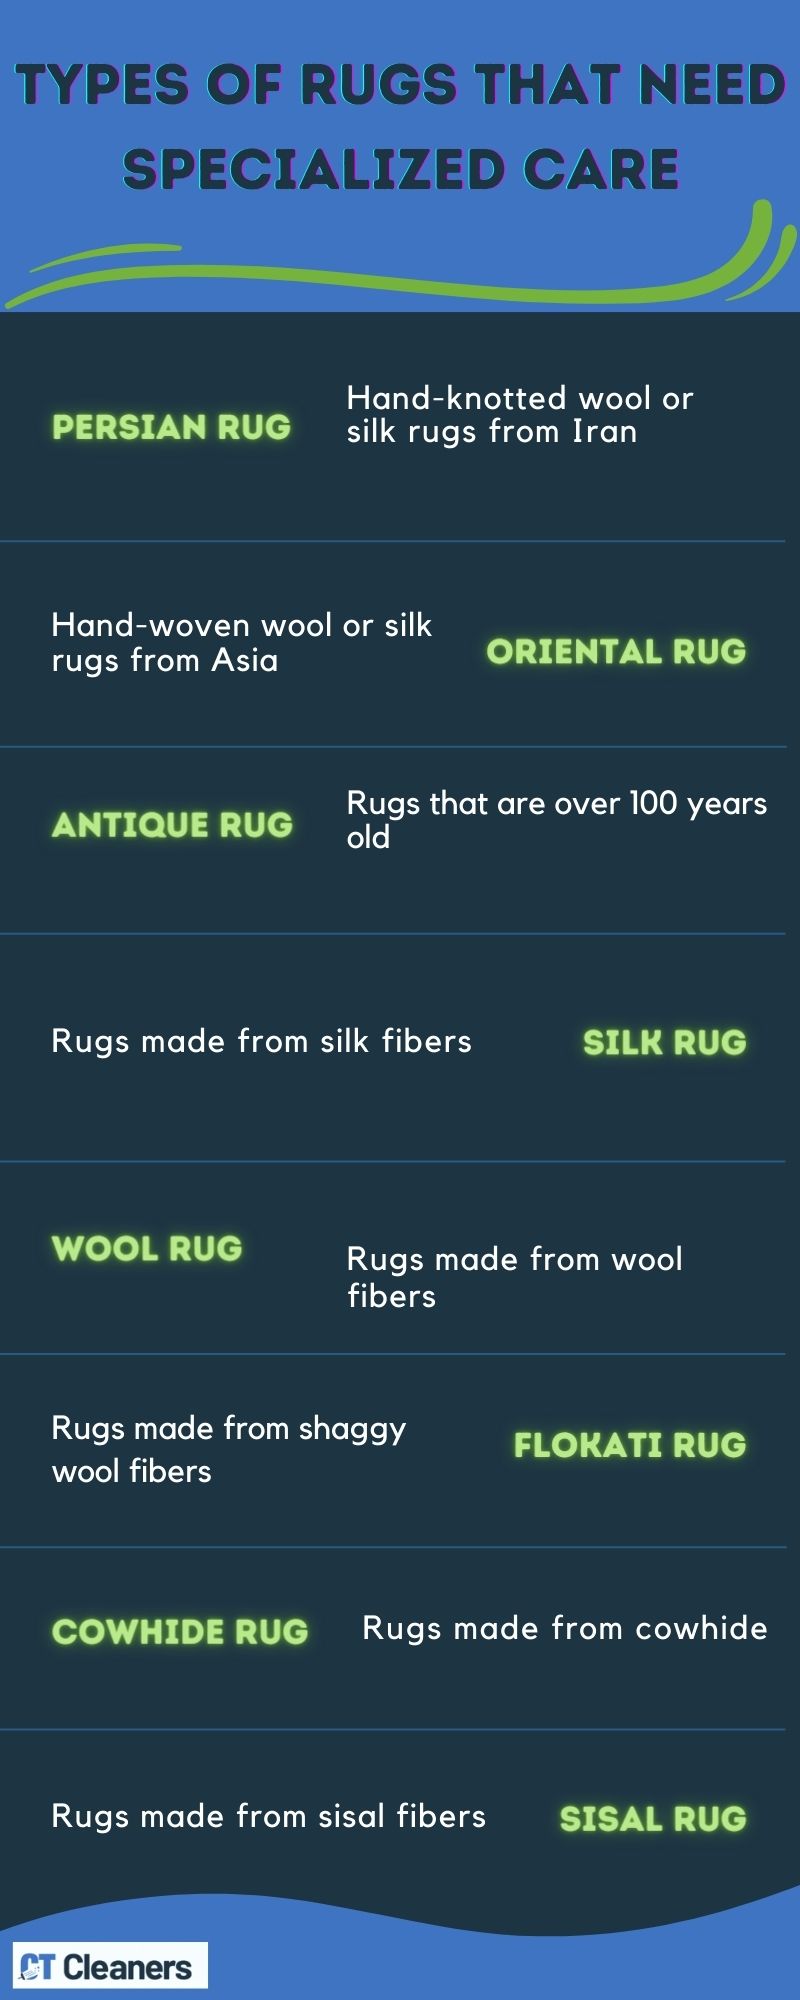 Types of Rugs That Need Specialized Care